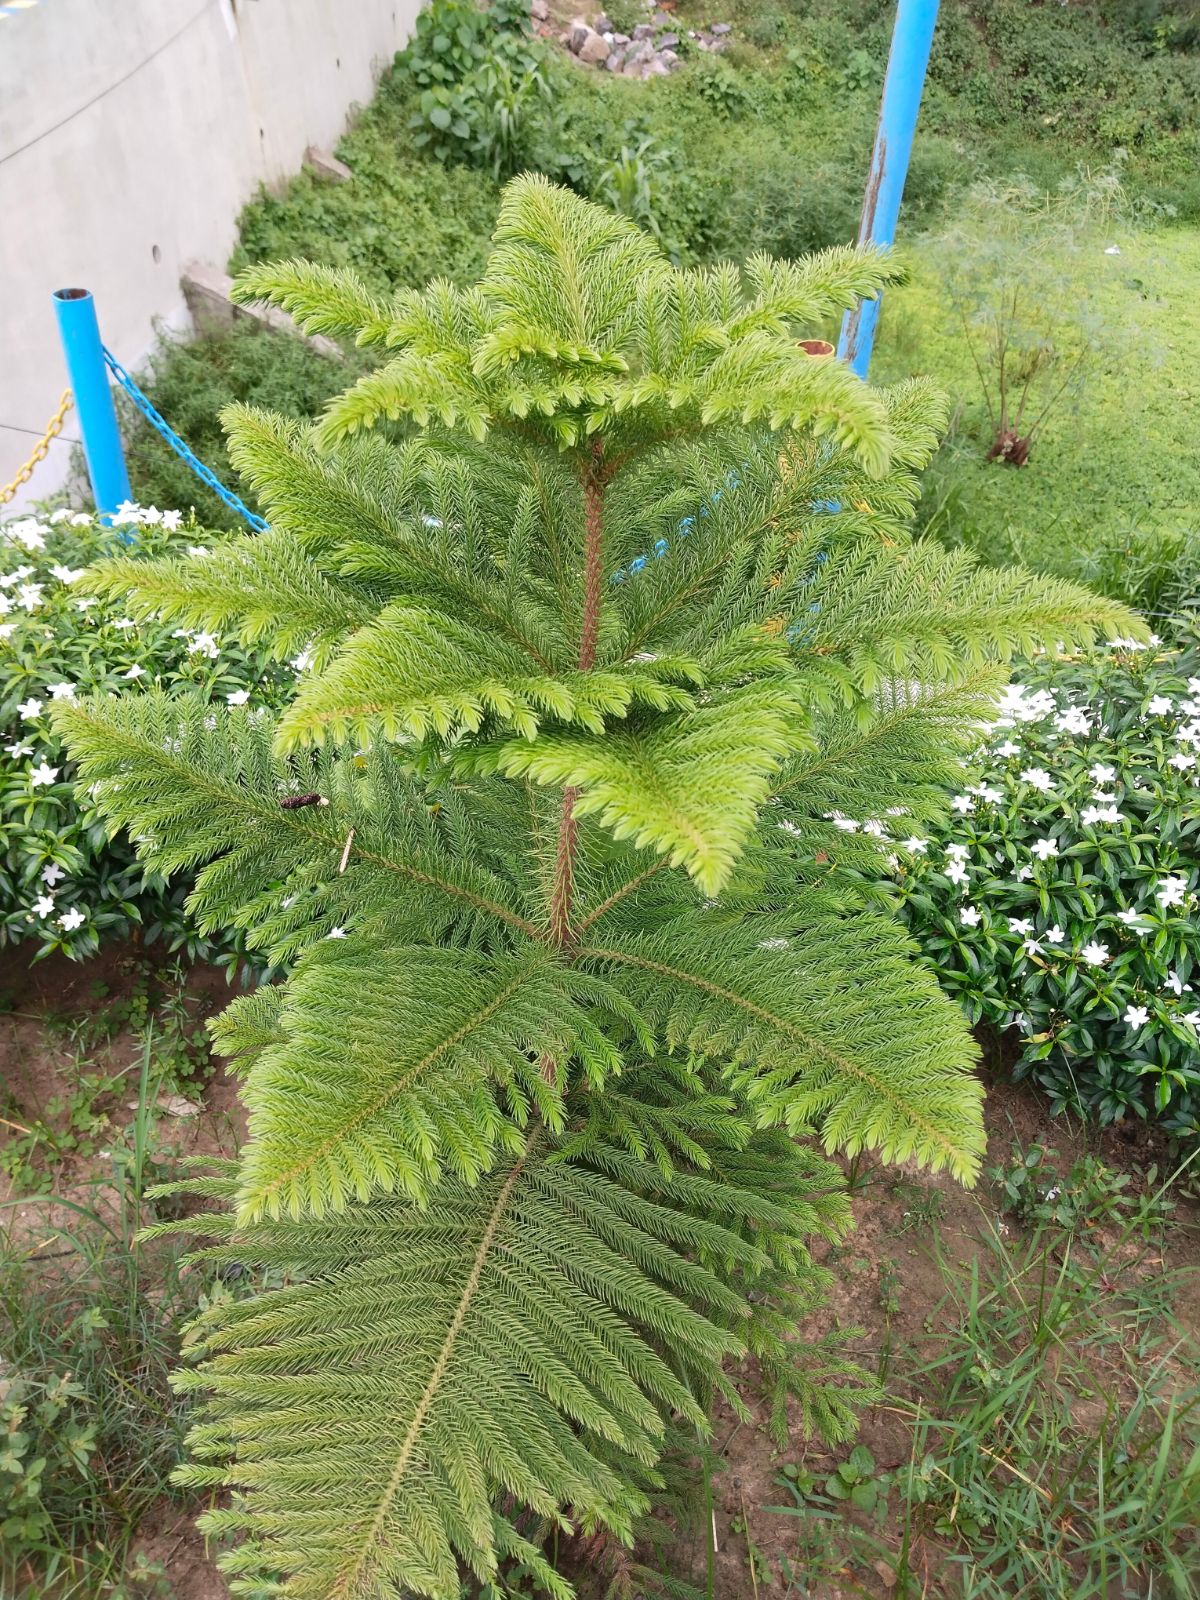 Norfolk Island pine with Large fern-like branches